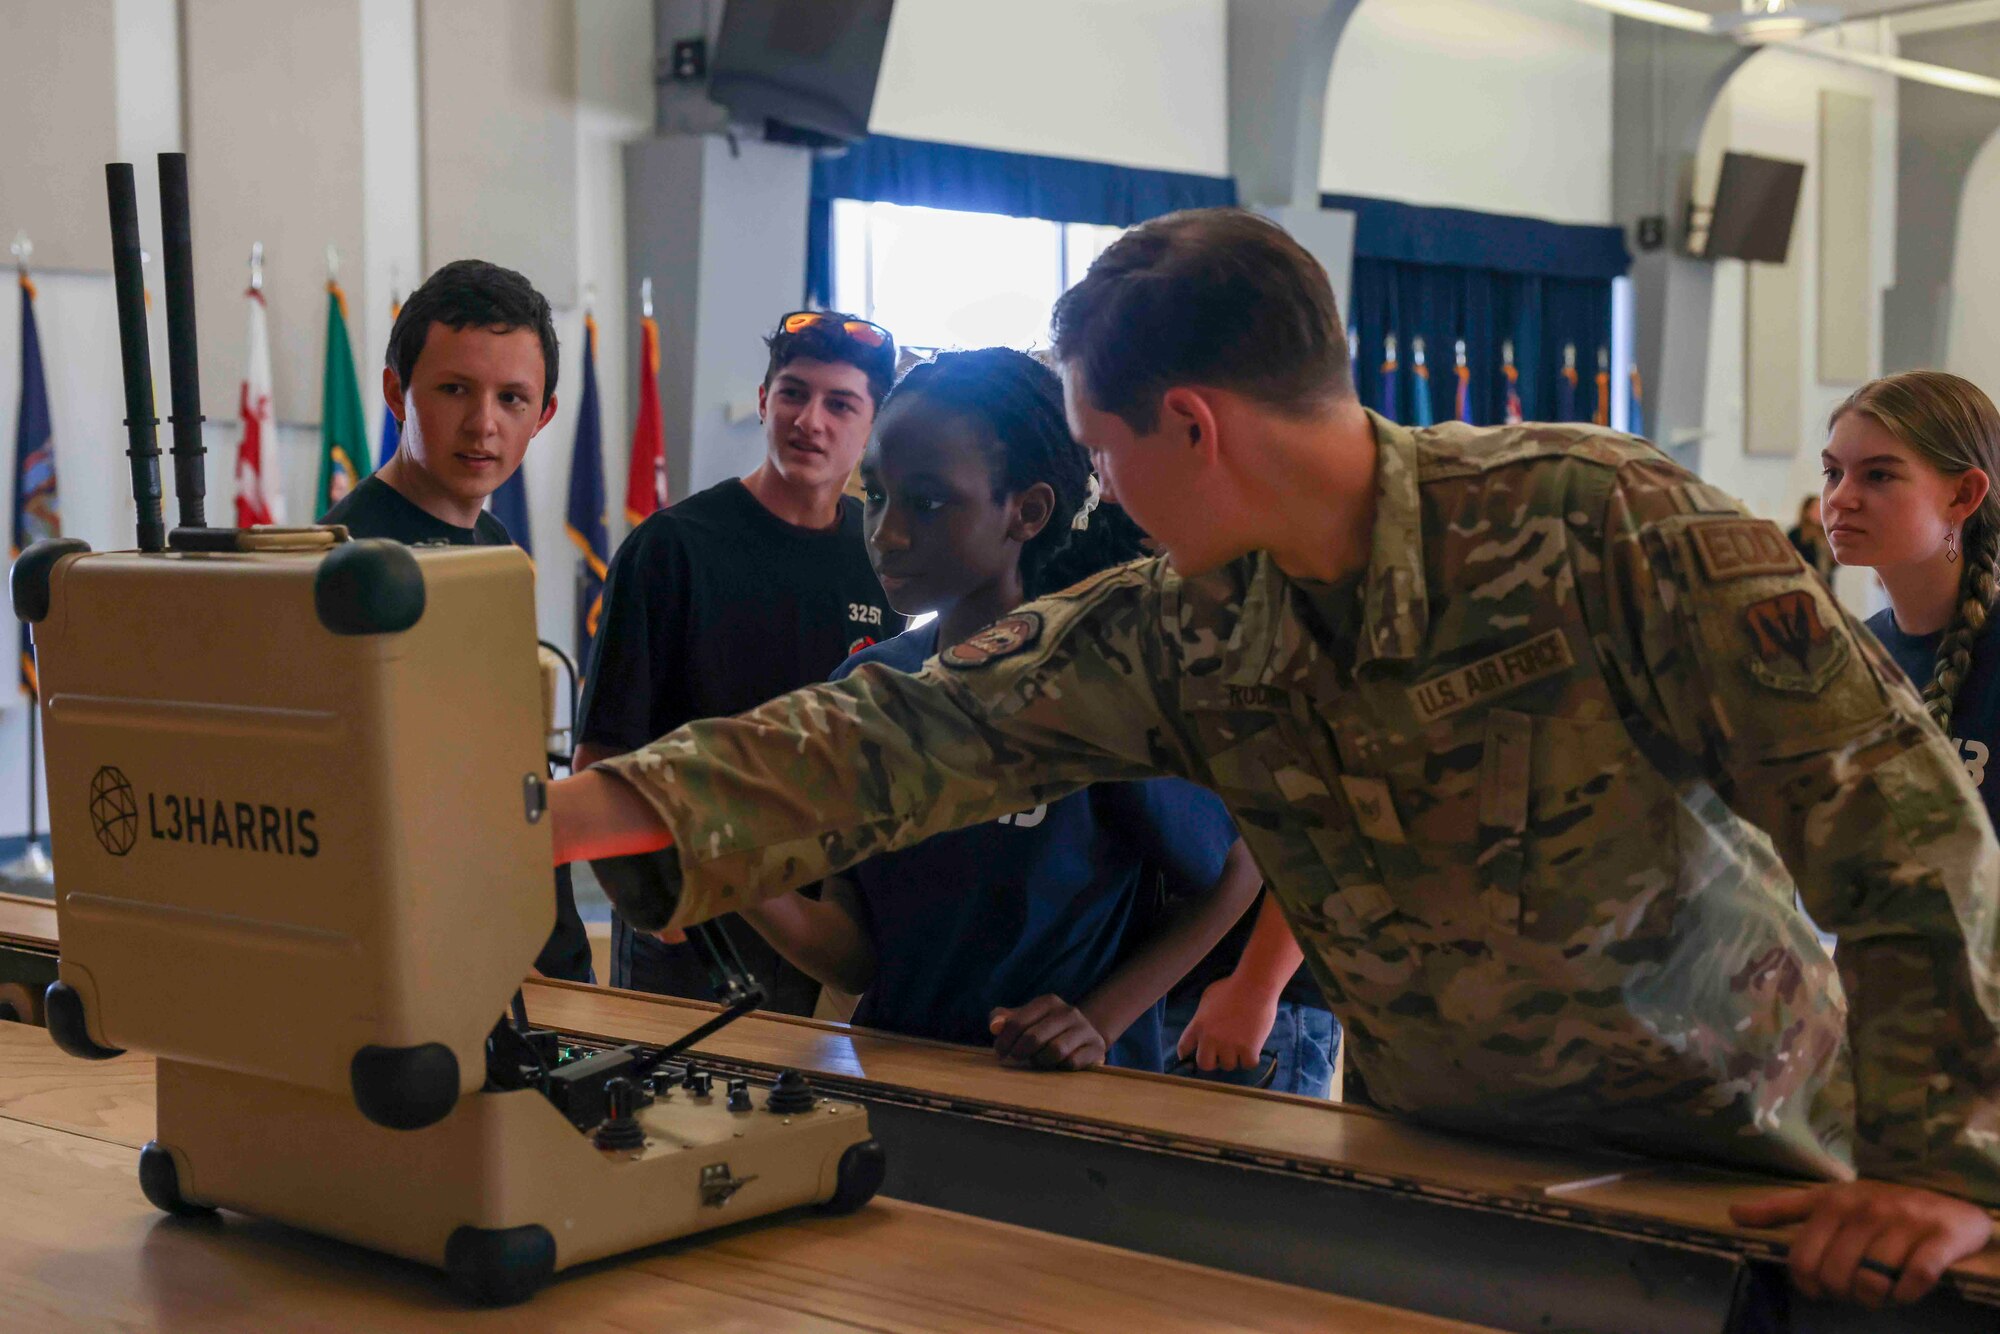 U.S. Air Force Staff Sgt. Hunter Rudnik, 9th Civil Engineer Squadron explosive ordnance technician, demonstrates the T-7 Explosive Ordnance Disposal robot to students with For Inspiration and Recognition of Science and Technology (FIRST), during a base tour Aug. 3, 2023, at Beale Air Force Base, California.